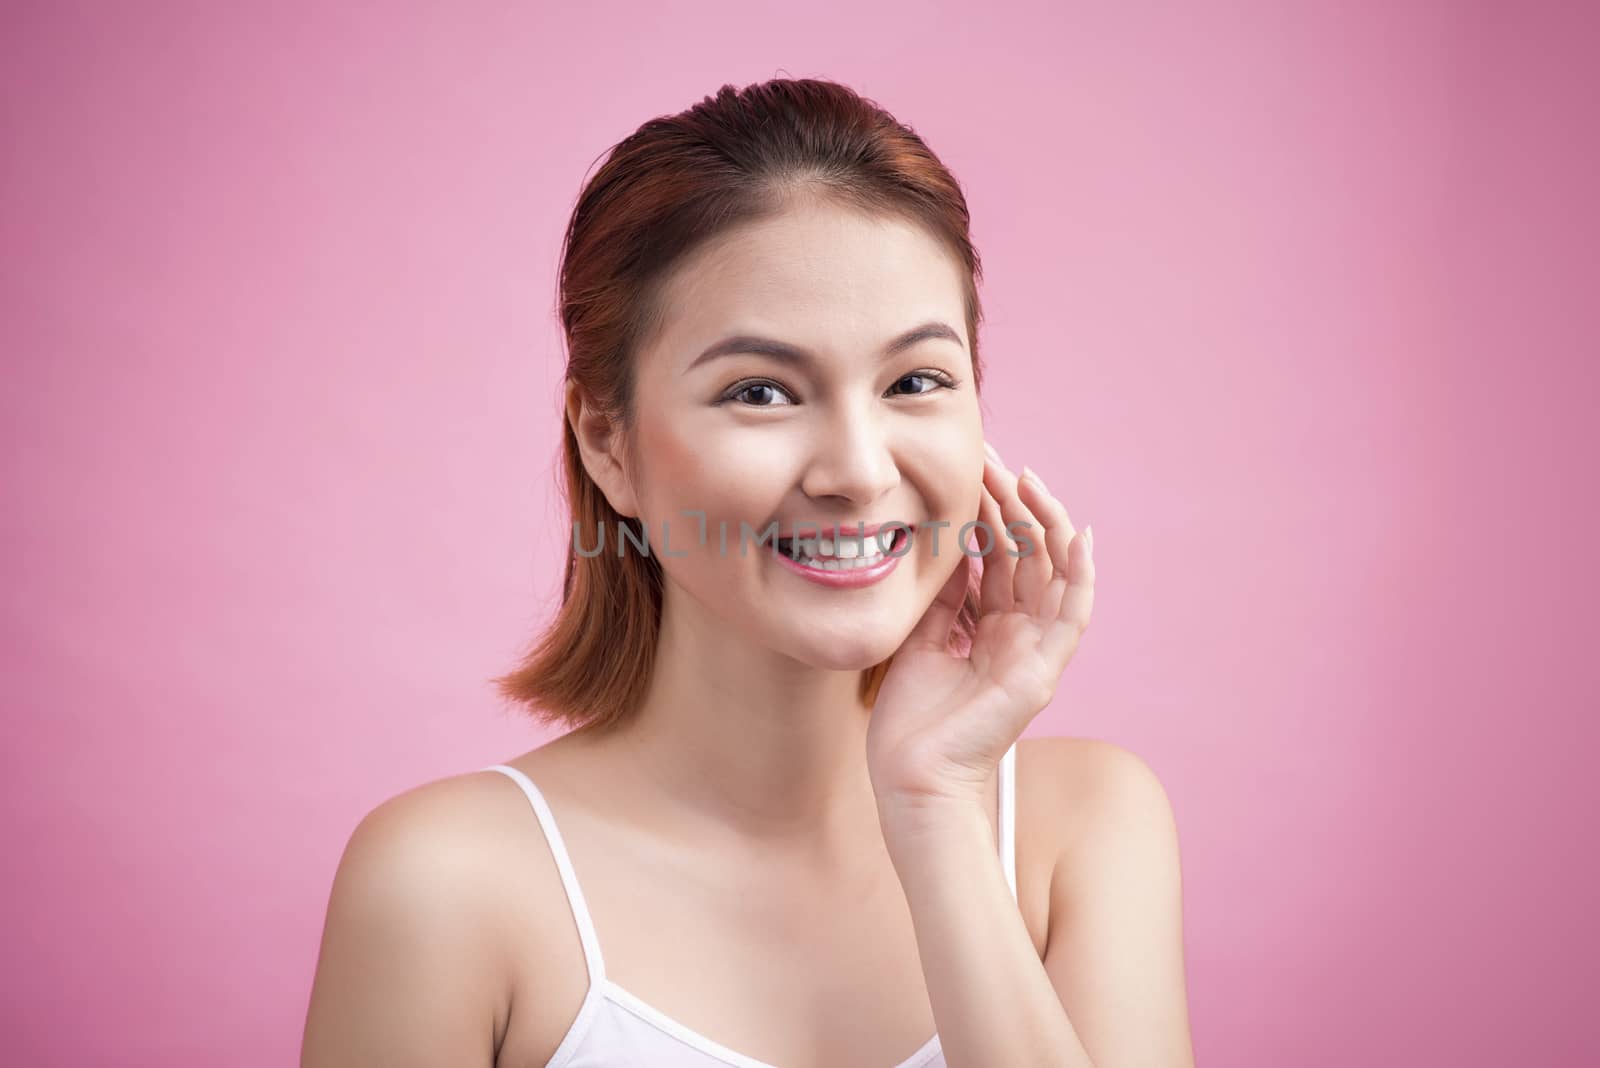 Portrait of a beautiful smiling young woman with natural make-up. Skincare, healthcare. Healthy teeth. Studio shot. Isolated on Pink Background.